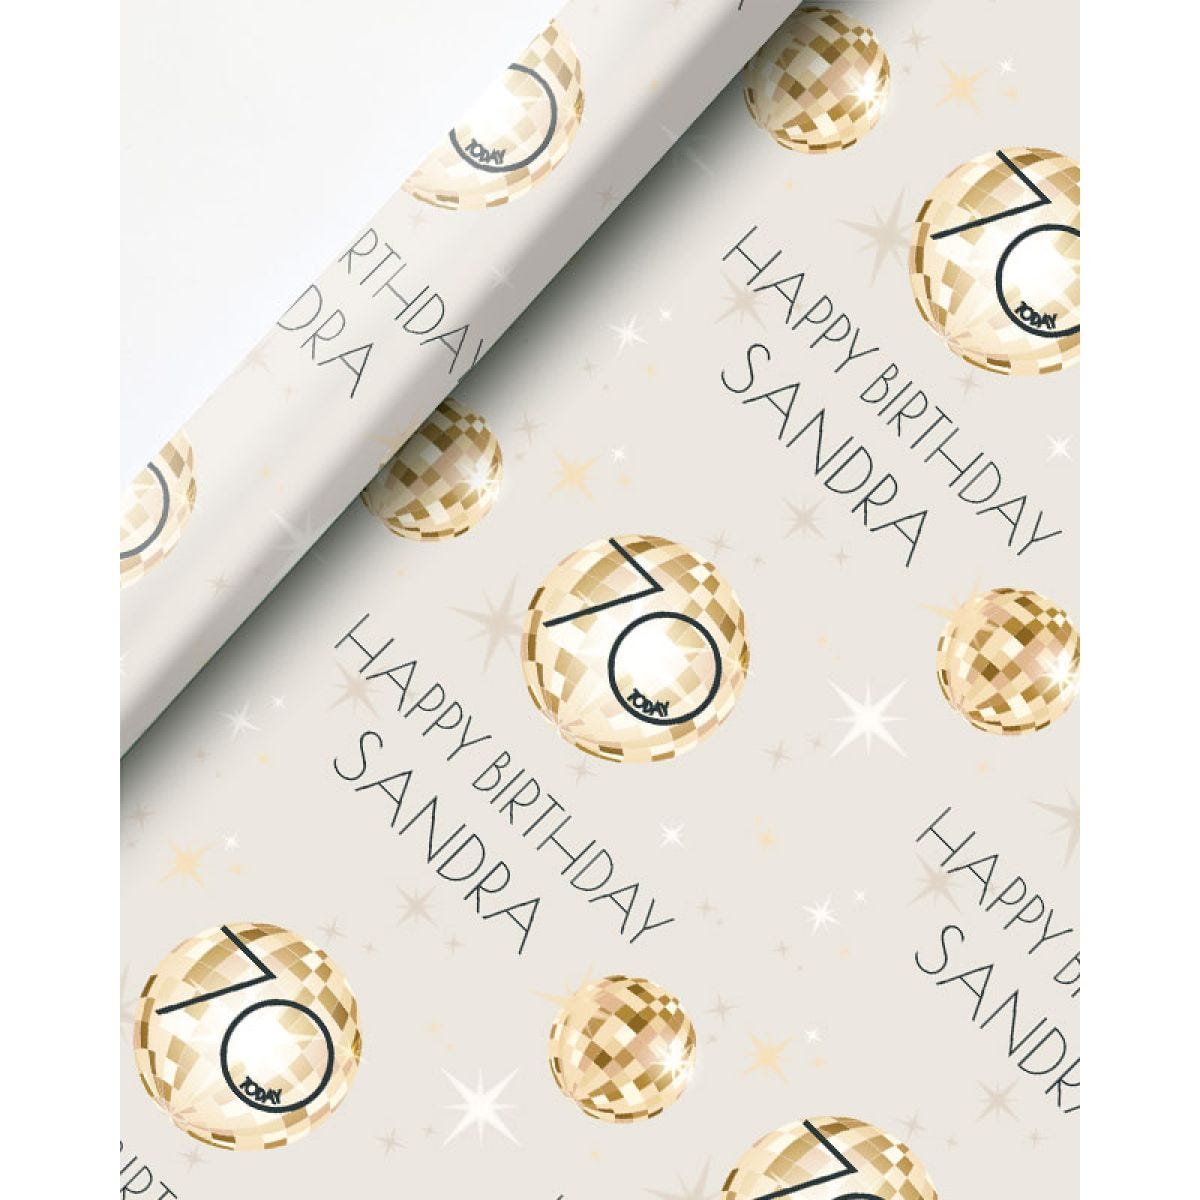 Cream & Gold Disco Ball 70th Birthday Personalised Wrapping Paper